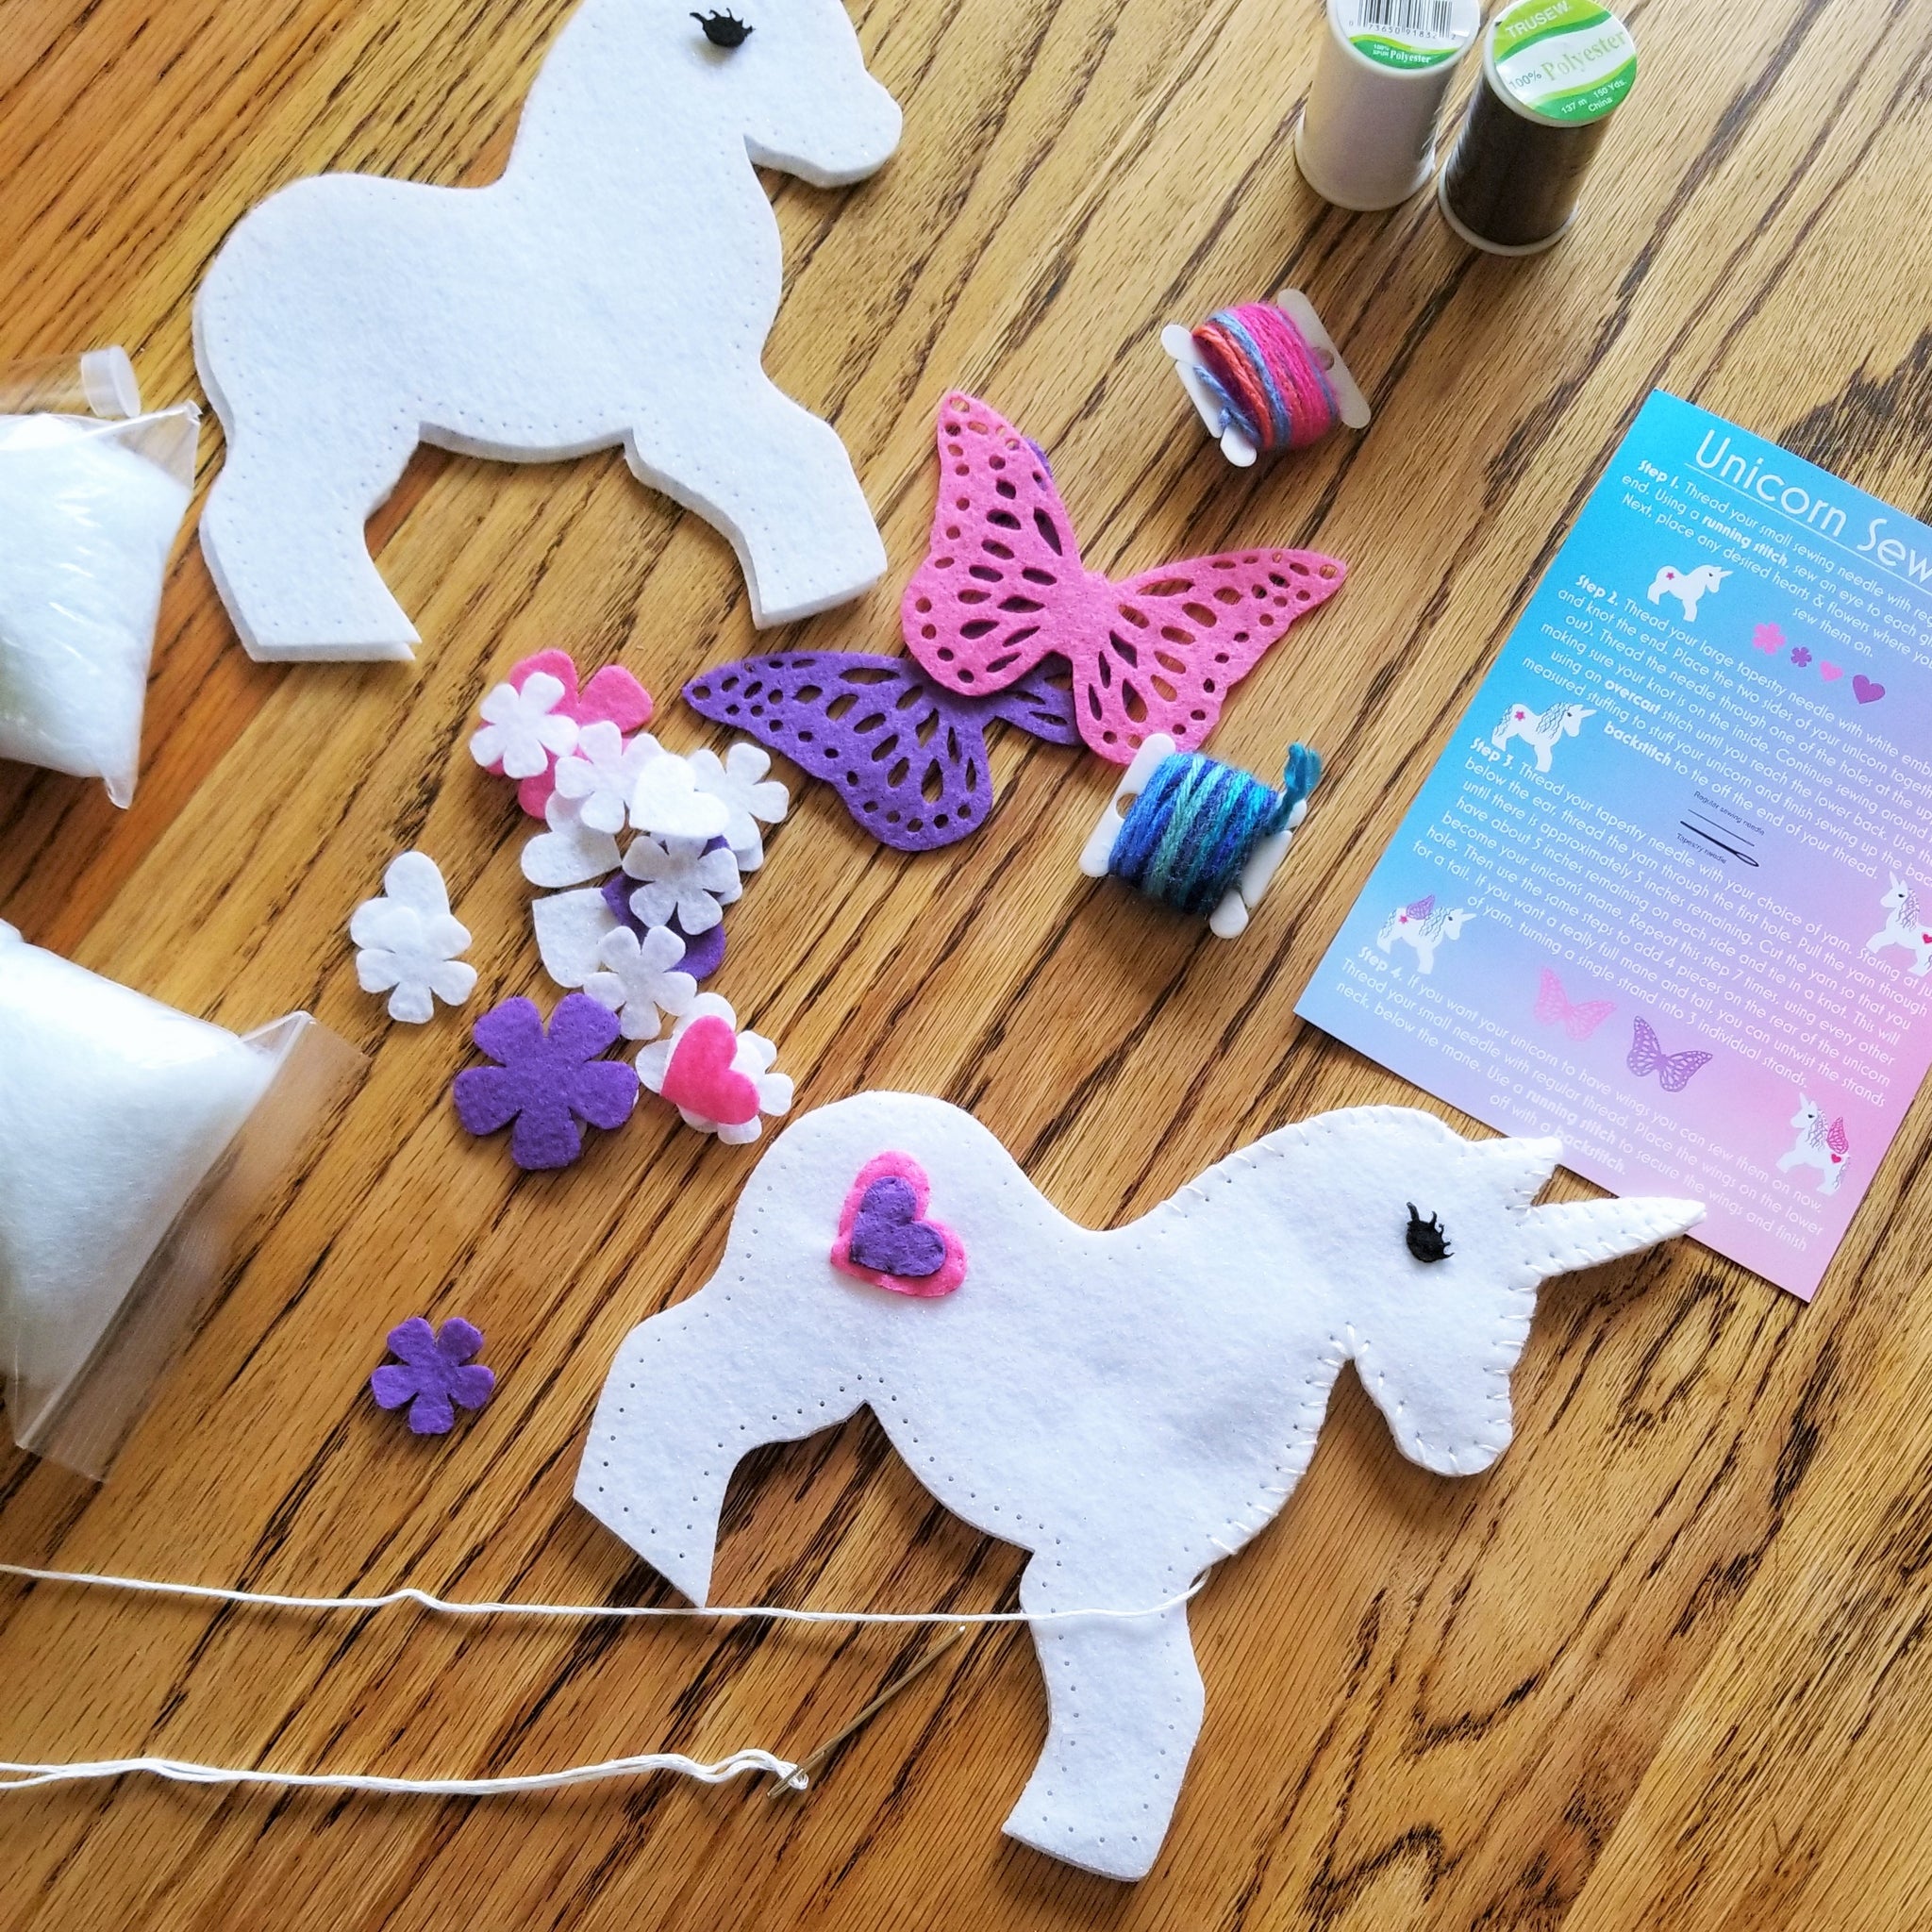 Felt Crafts for Kids to Sew – Beginner Sewing Projects